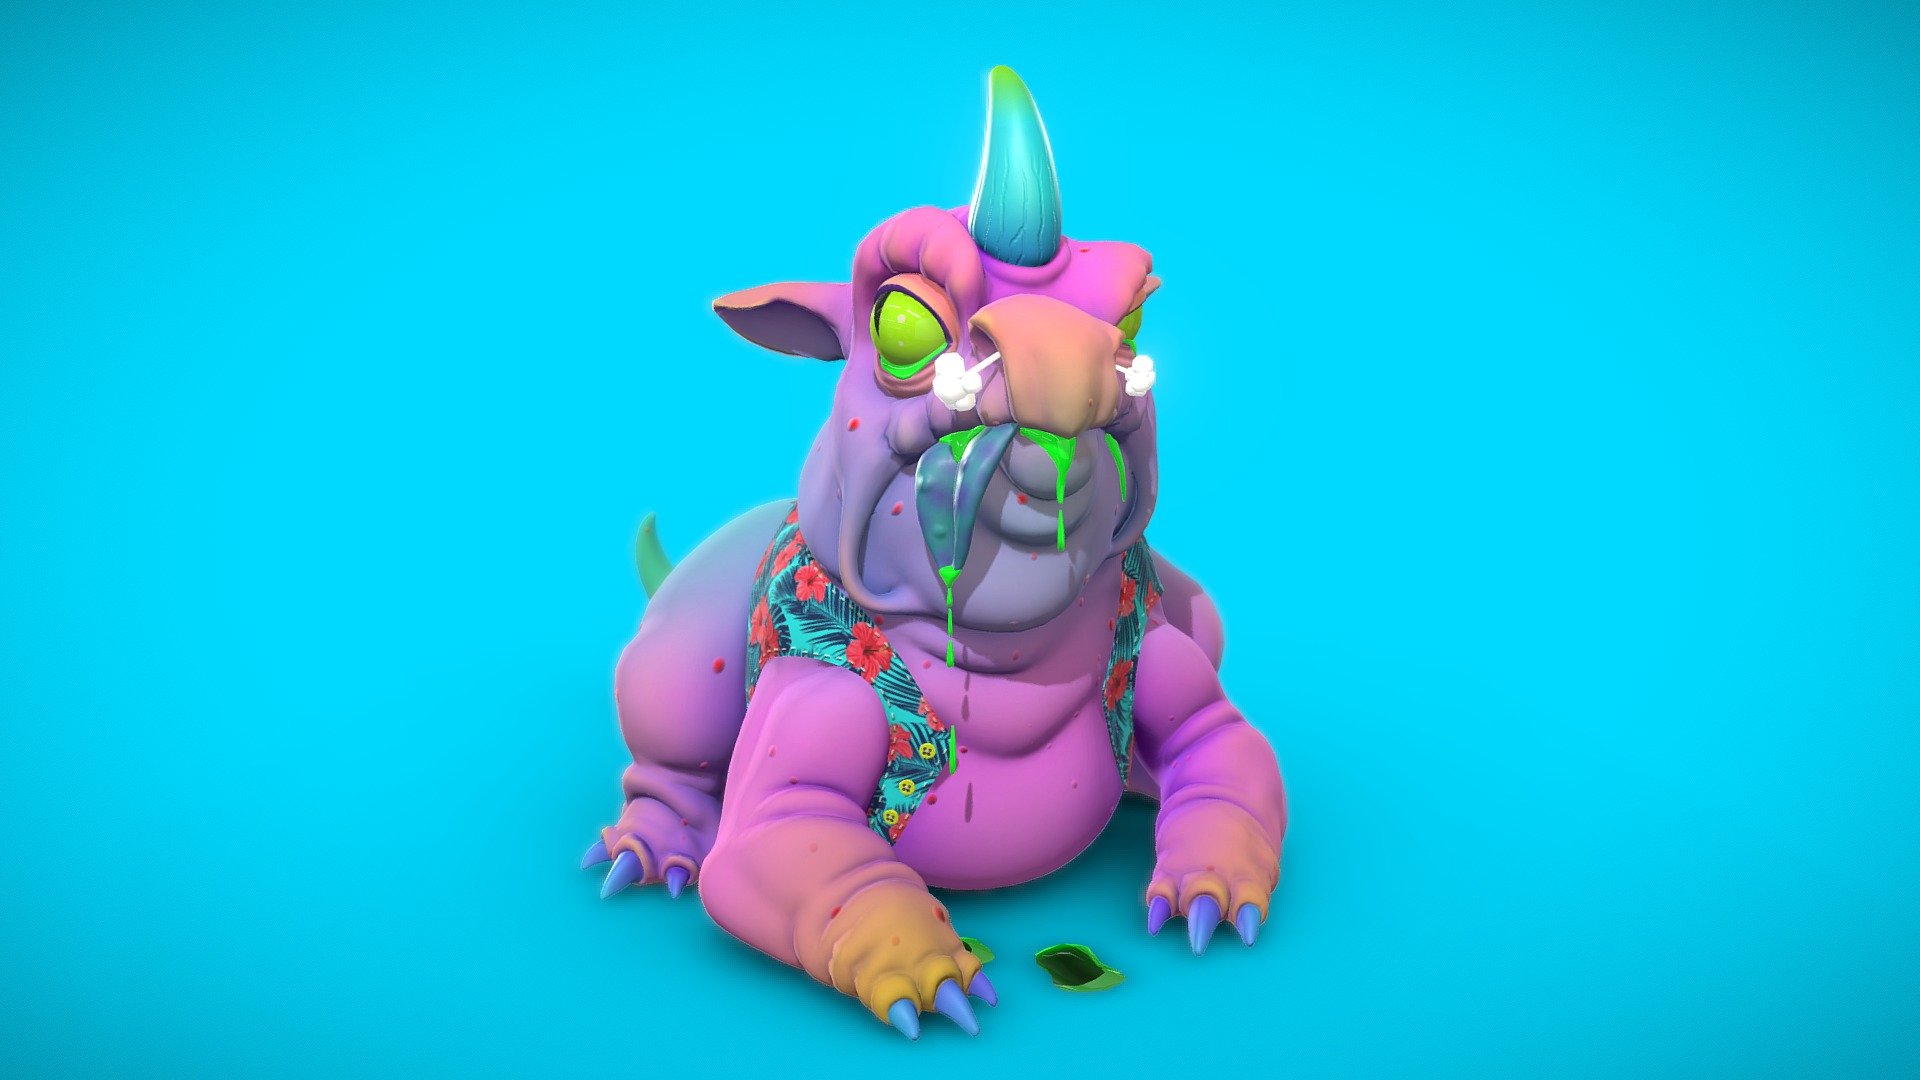 Based on the Rhinoad character by Danny Williams: https://www.artstation.com/artwork/w8lVGX

Just for fun.




        class="lazyloaded"
        src="https://img.buymeacoffee.com/button-api/?text=Buy me a coffee&amp;emoji=&amp;slug=keianhzo&amp;button_colour=ff6666&amp;font_colour=000000&amp;font_family=Bree&amp;outline_colour=000000&amp;coffee_colour=FFDD00"&gt; - Rhinoad - Download Free 3D model by keianhzo 3d model